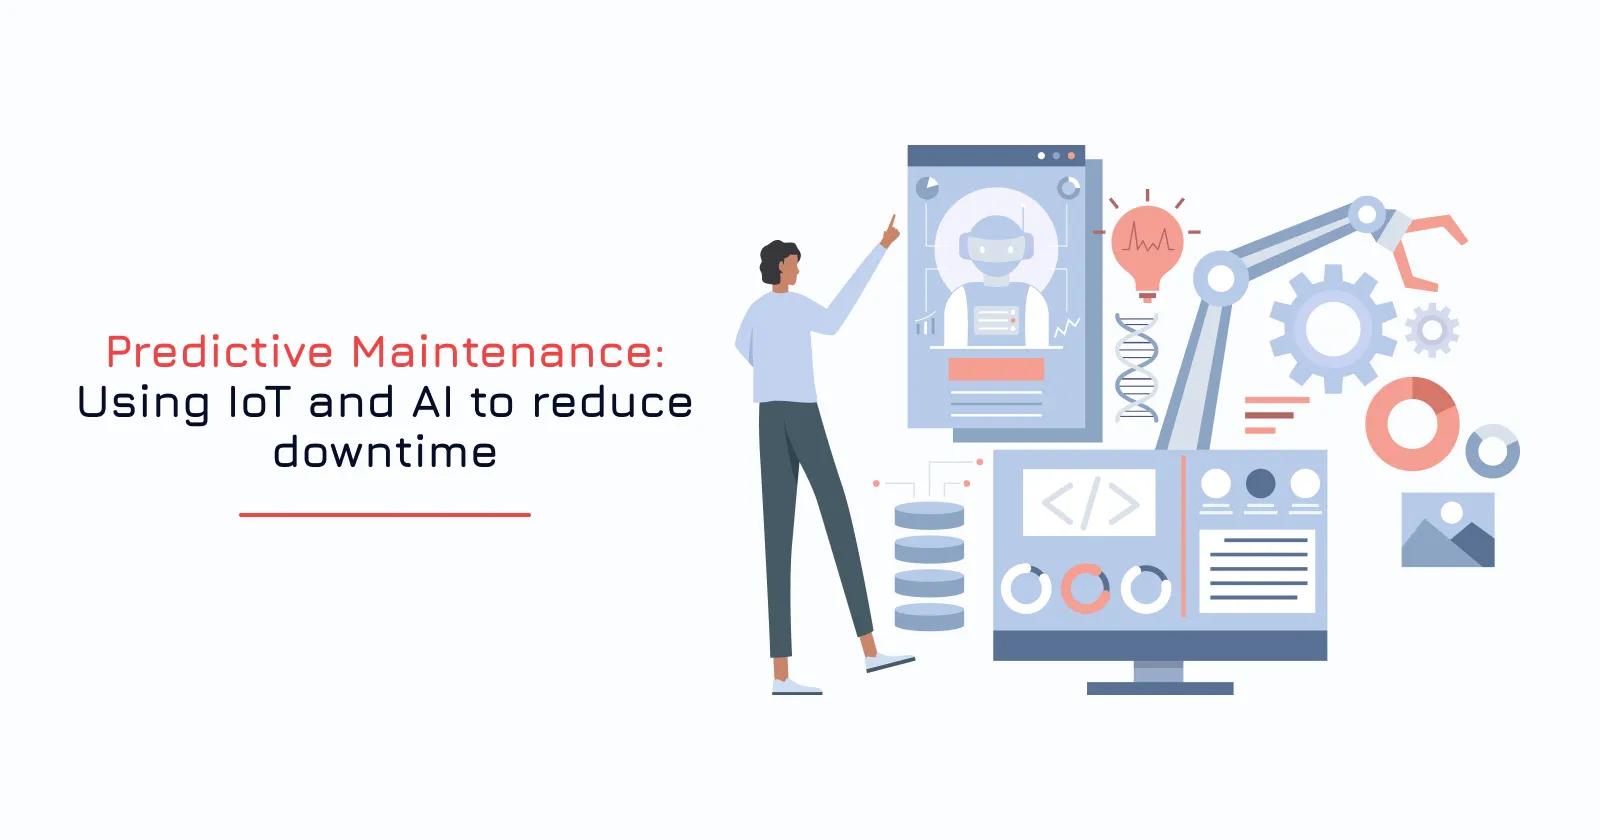 Predictive Maintenance: Using IoT and AI to reduce downtime